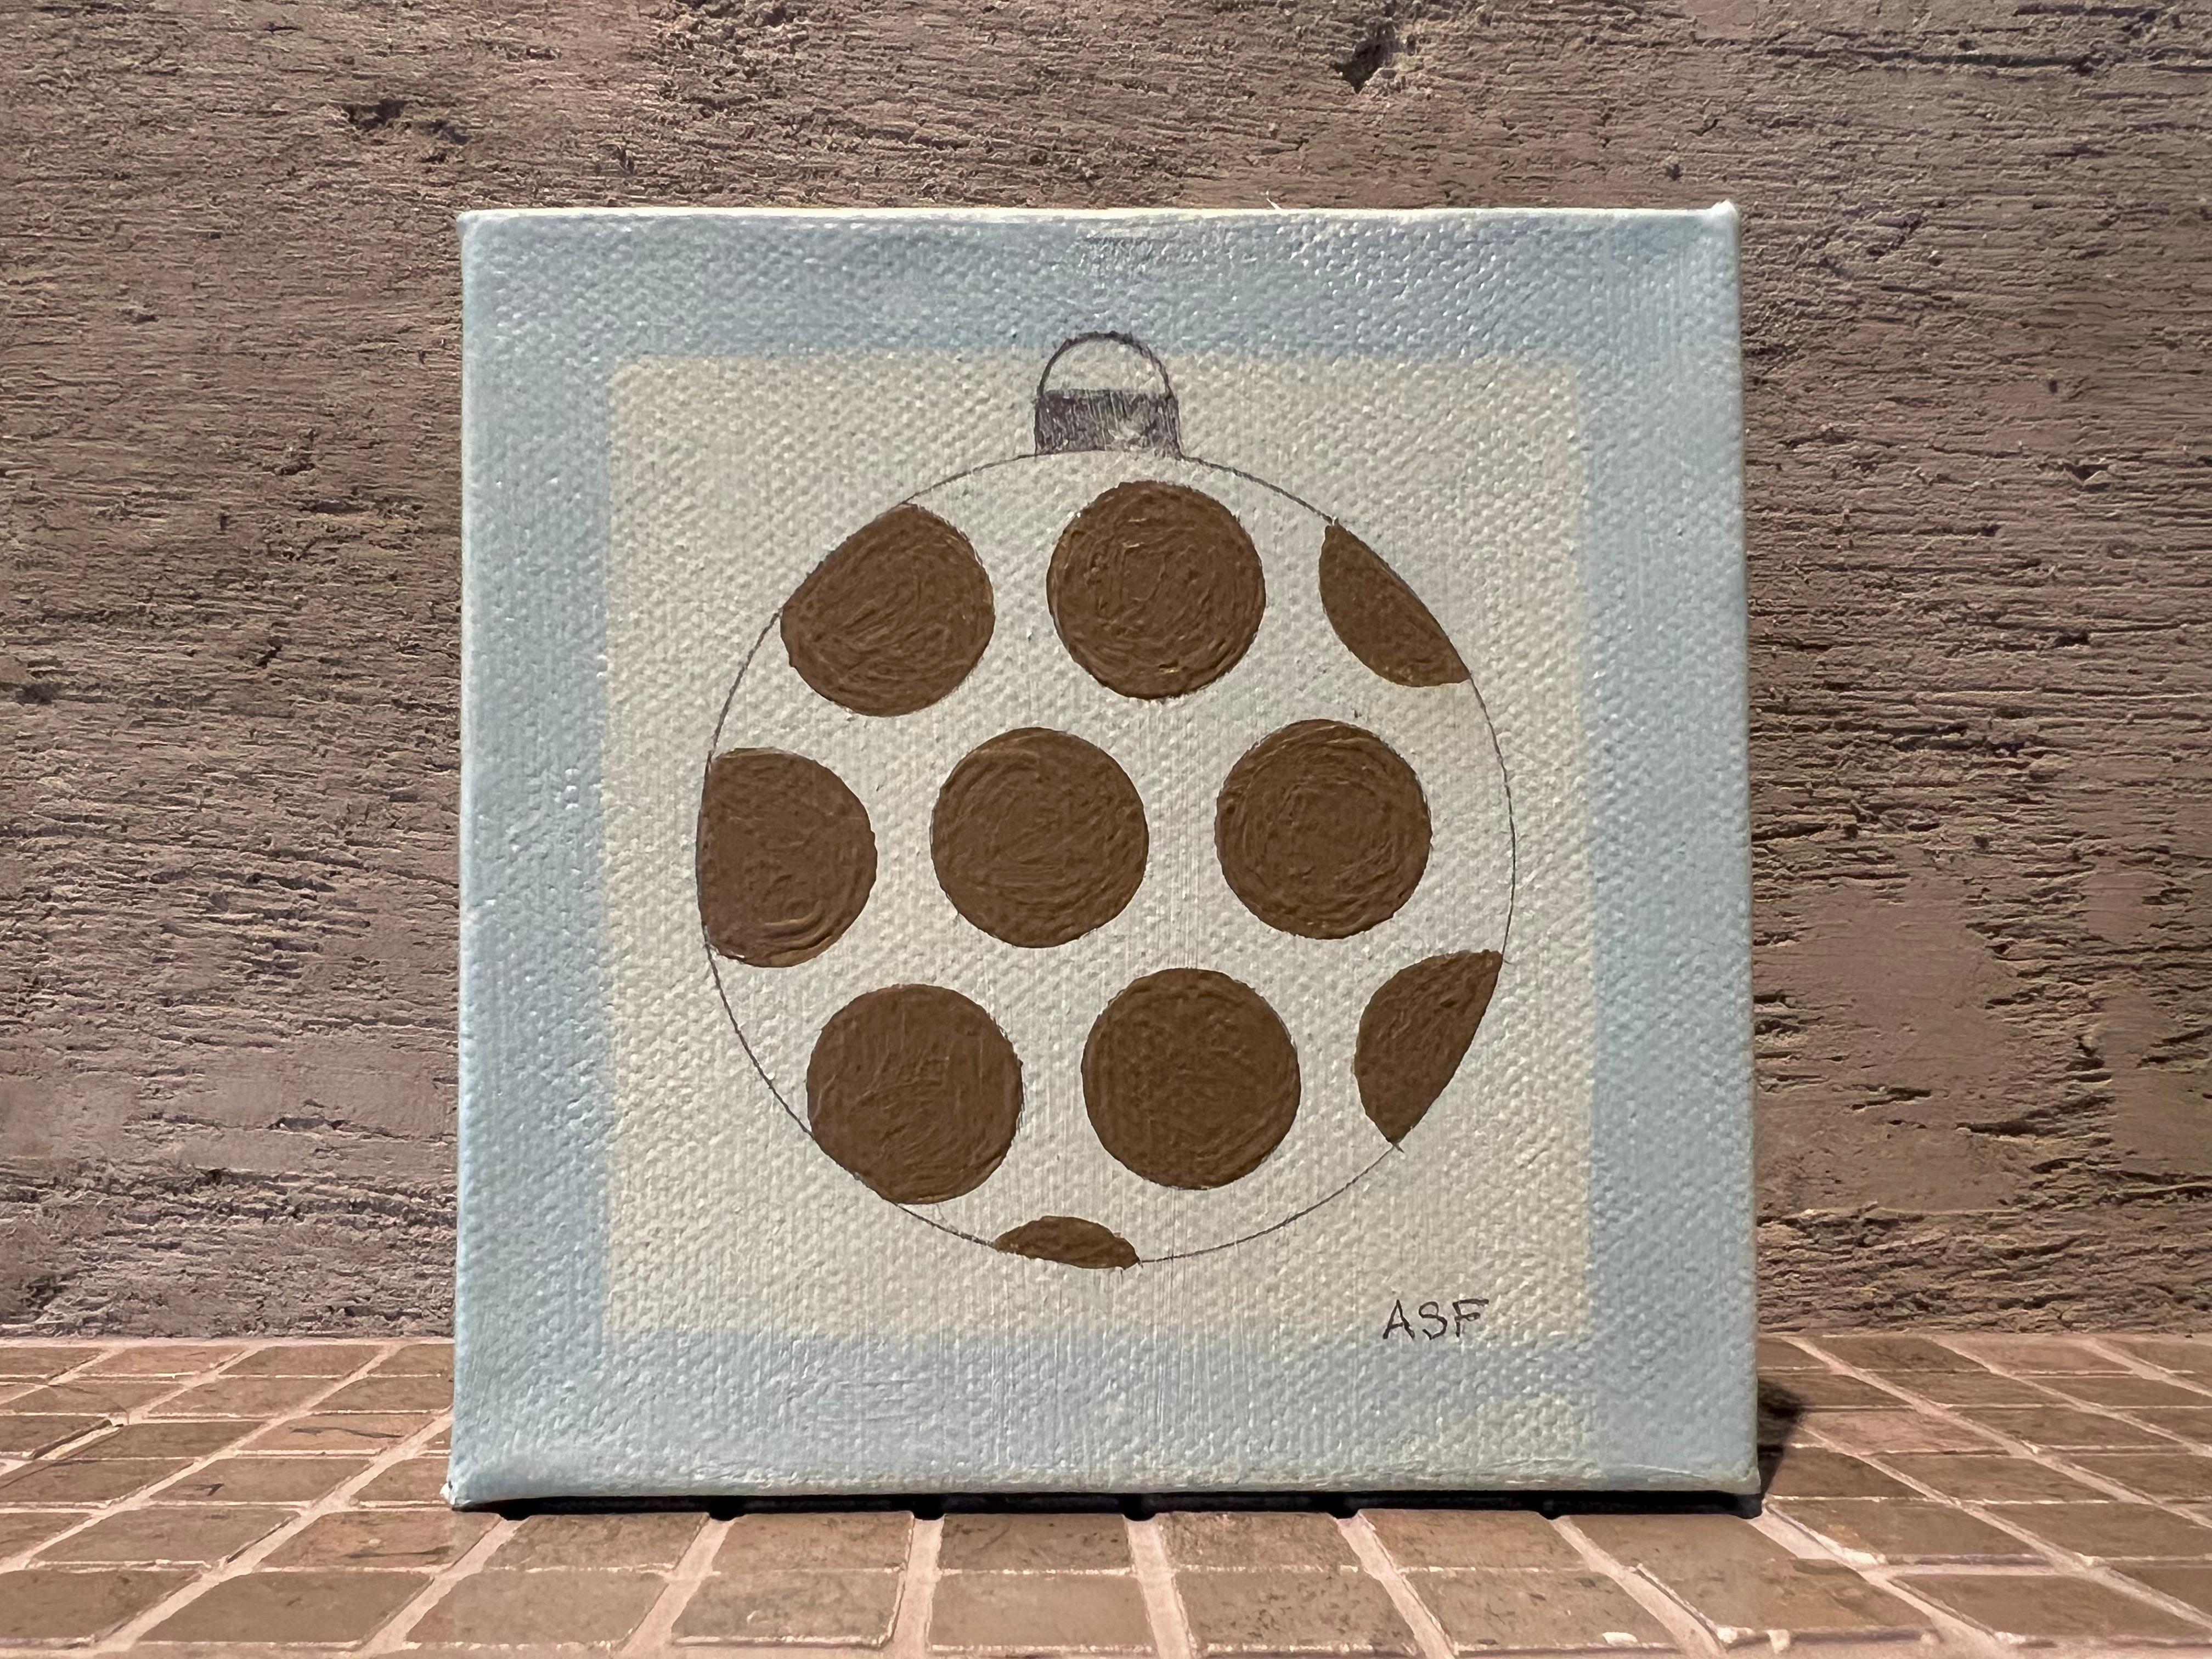 So little with so much to say. Discover the charm of this petite painting that speaks volumes. Using acrylic, the beauty lies in the thoughtfully simplified composition. Personalize your space by adding this timeless original piece to your Christmas